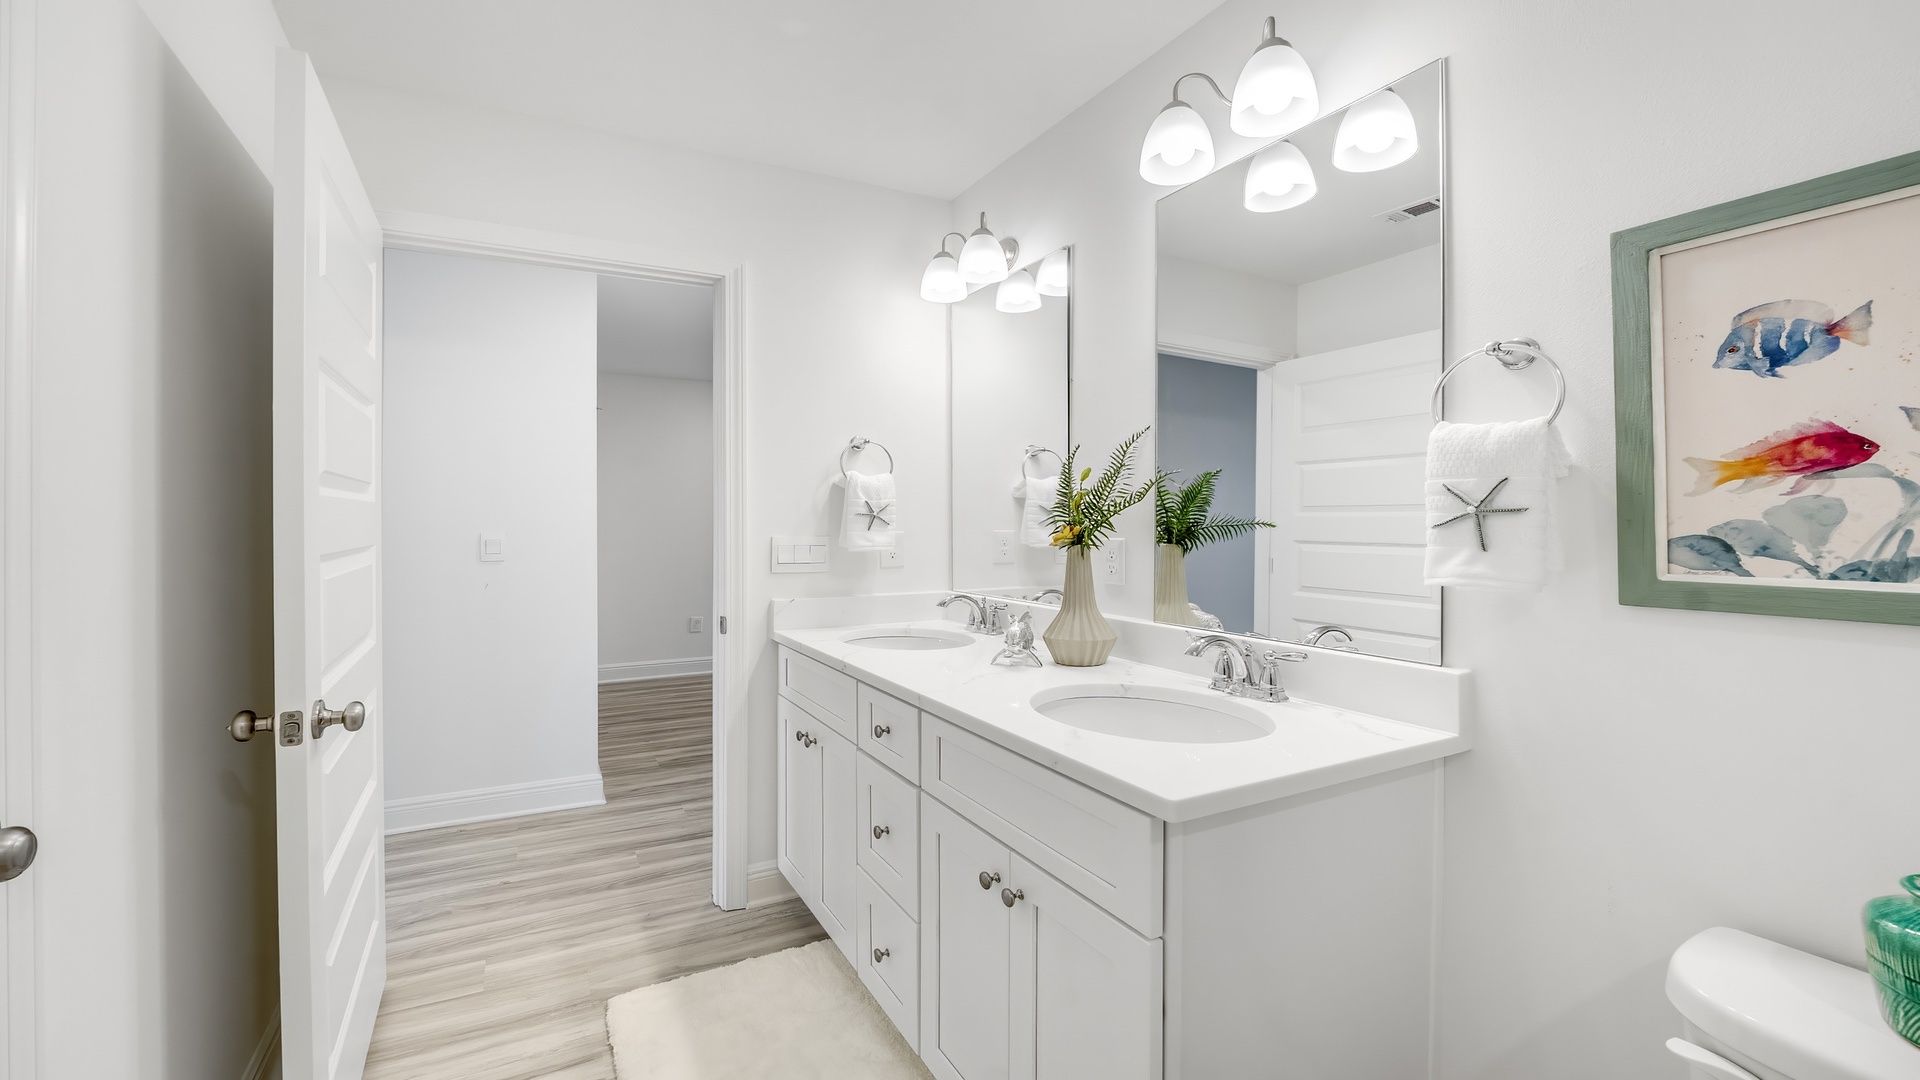 Bathroom with white quartz countertops and double vanity and white cabinets.